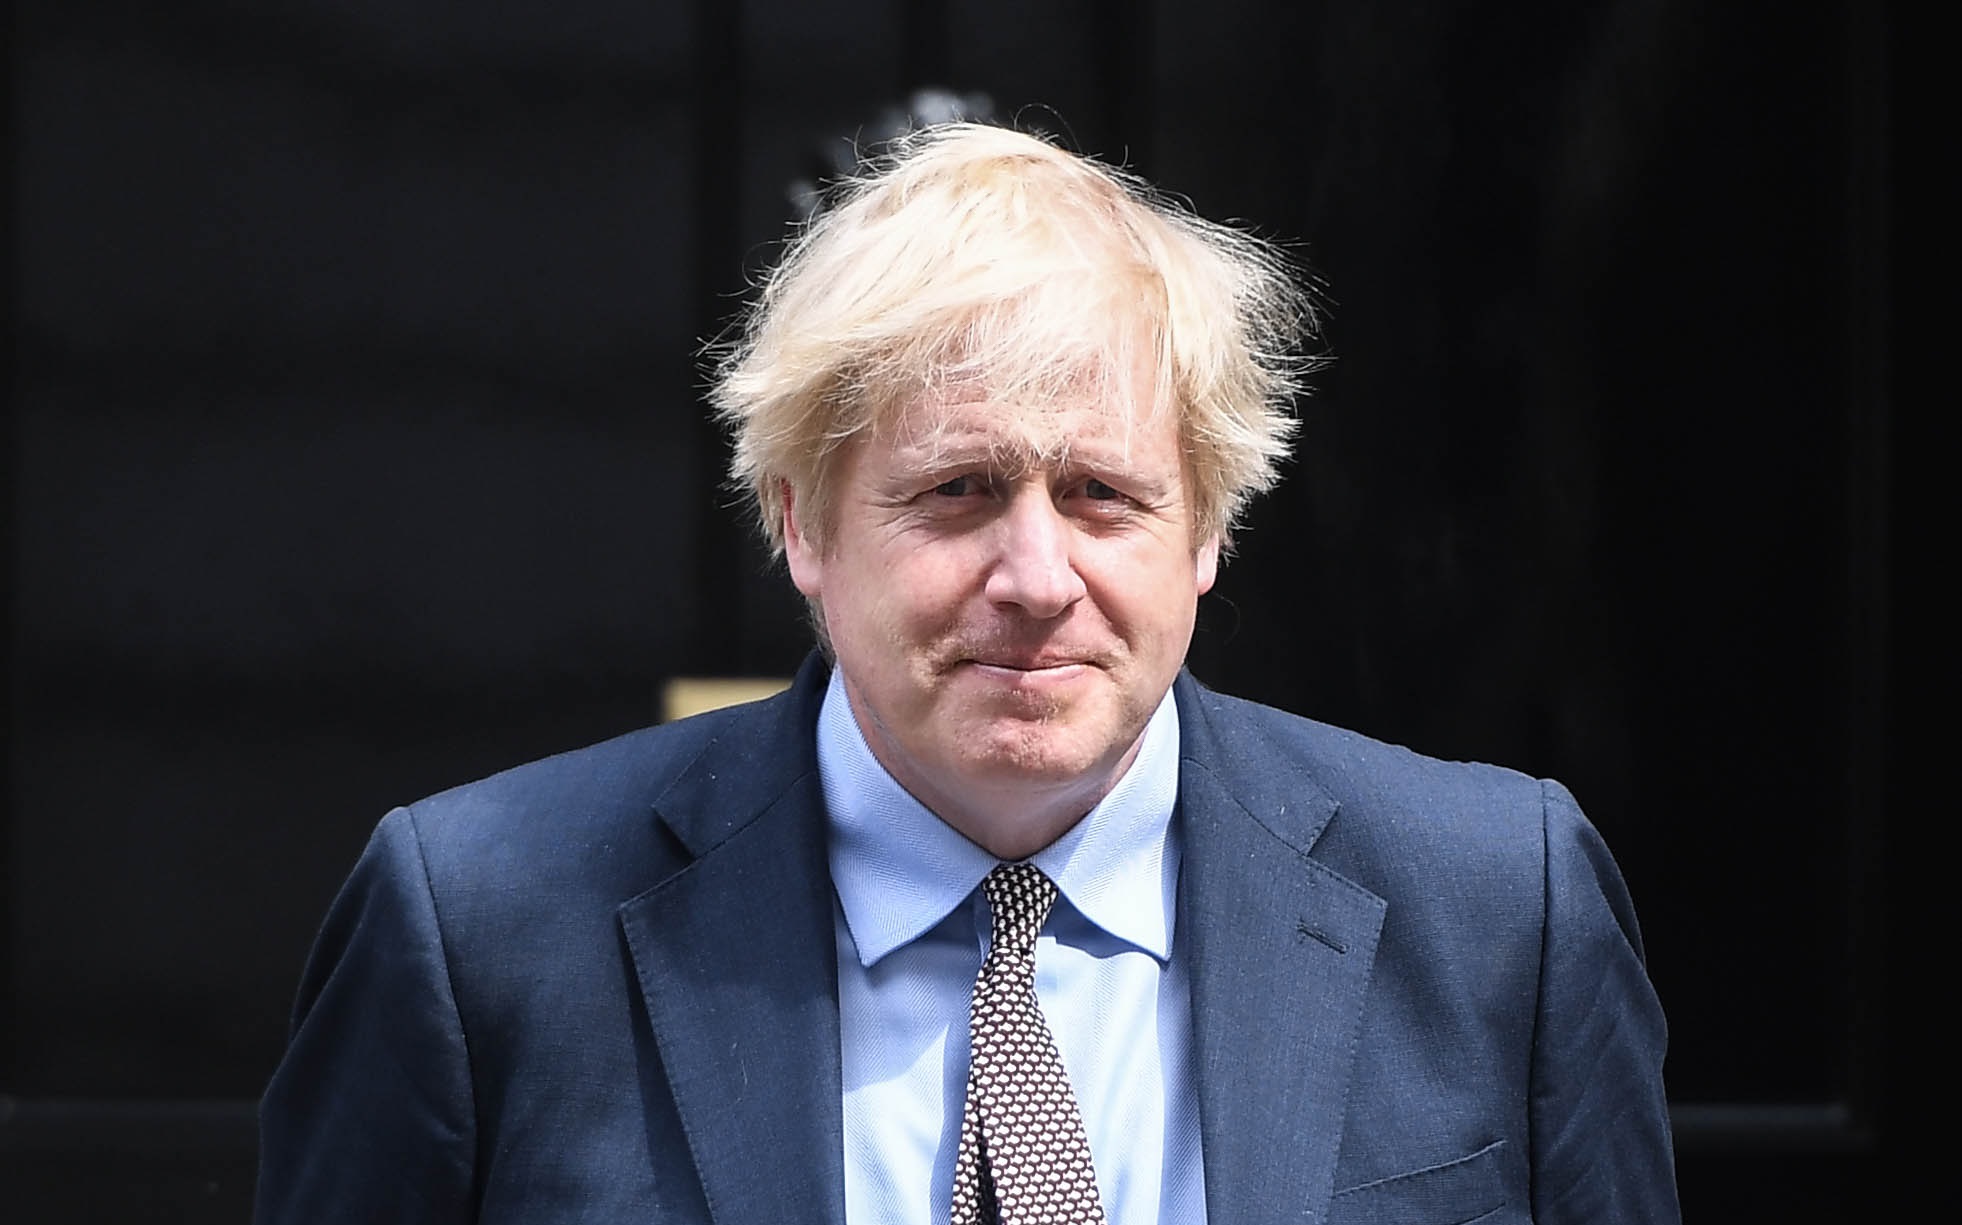 Evidence suggests Boris Johnson was warned against saying all Covid guidance had been followed at Downing Street gatherings.